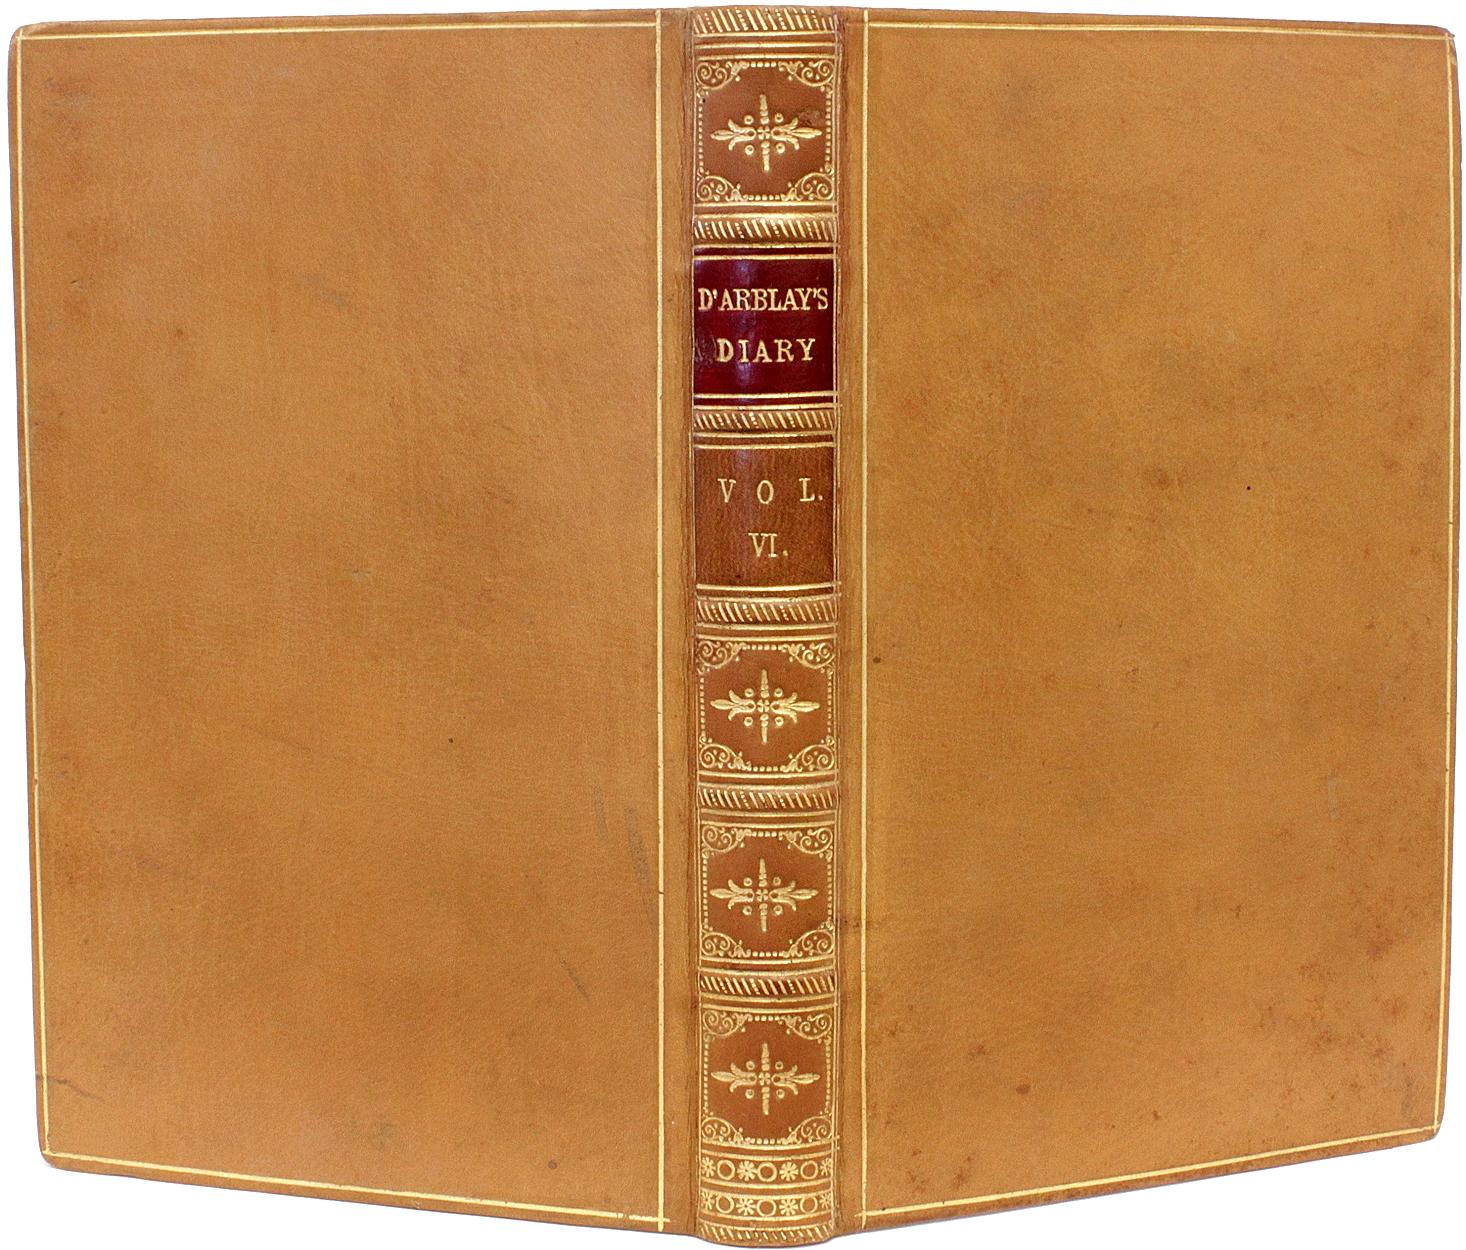 British Fanny Burney, Diary & Letters of Madame D'arblay, in a Full Leather Binding 1854 For Sale